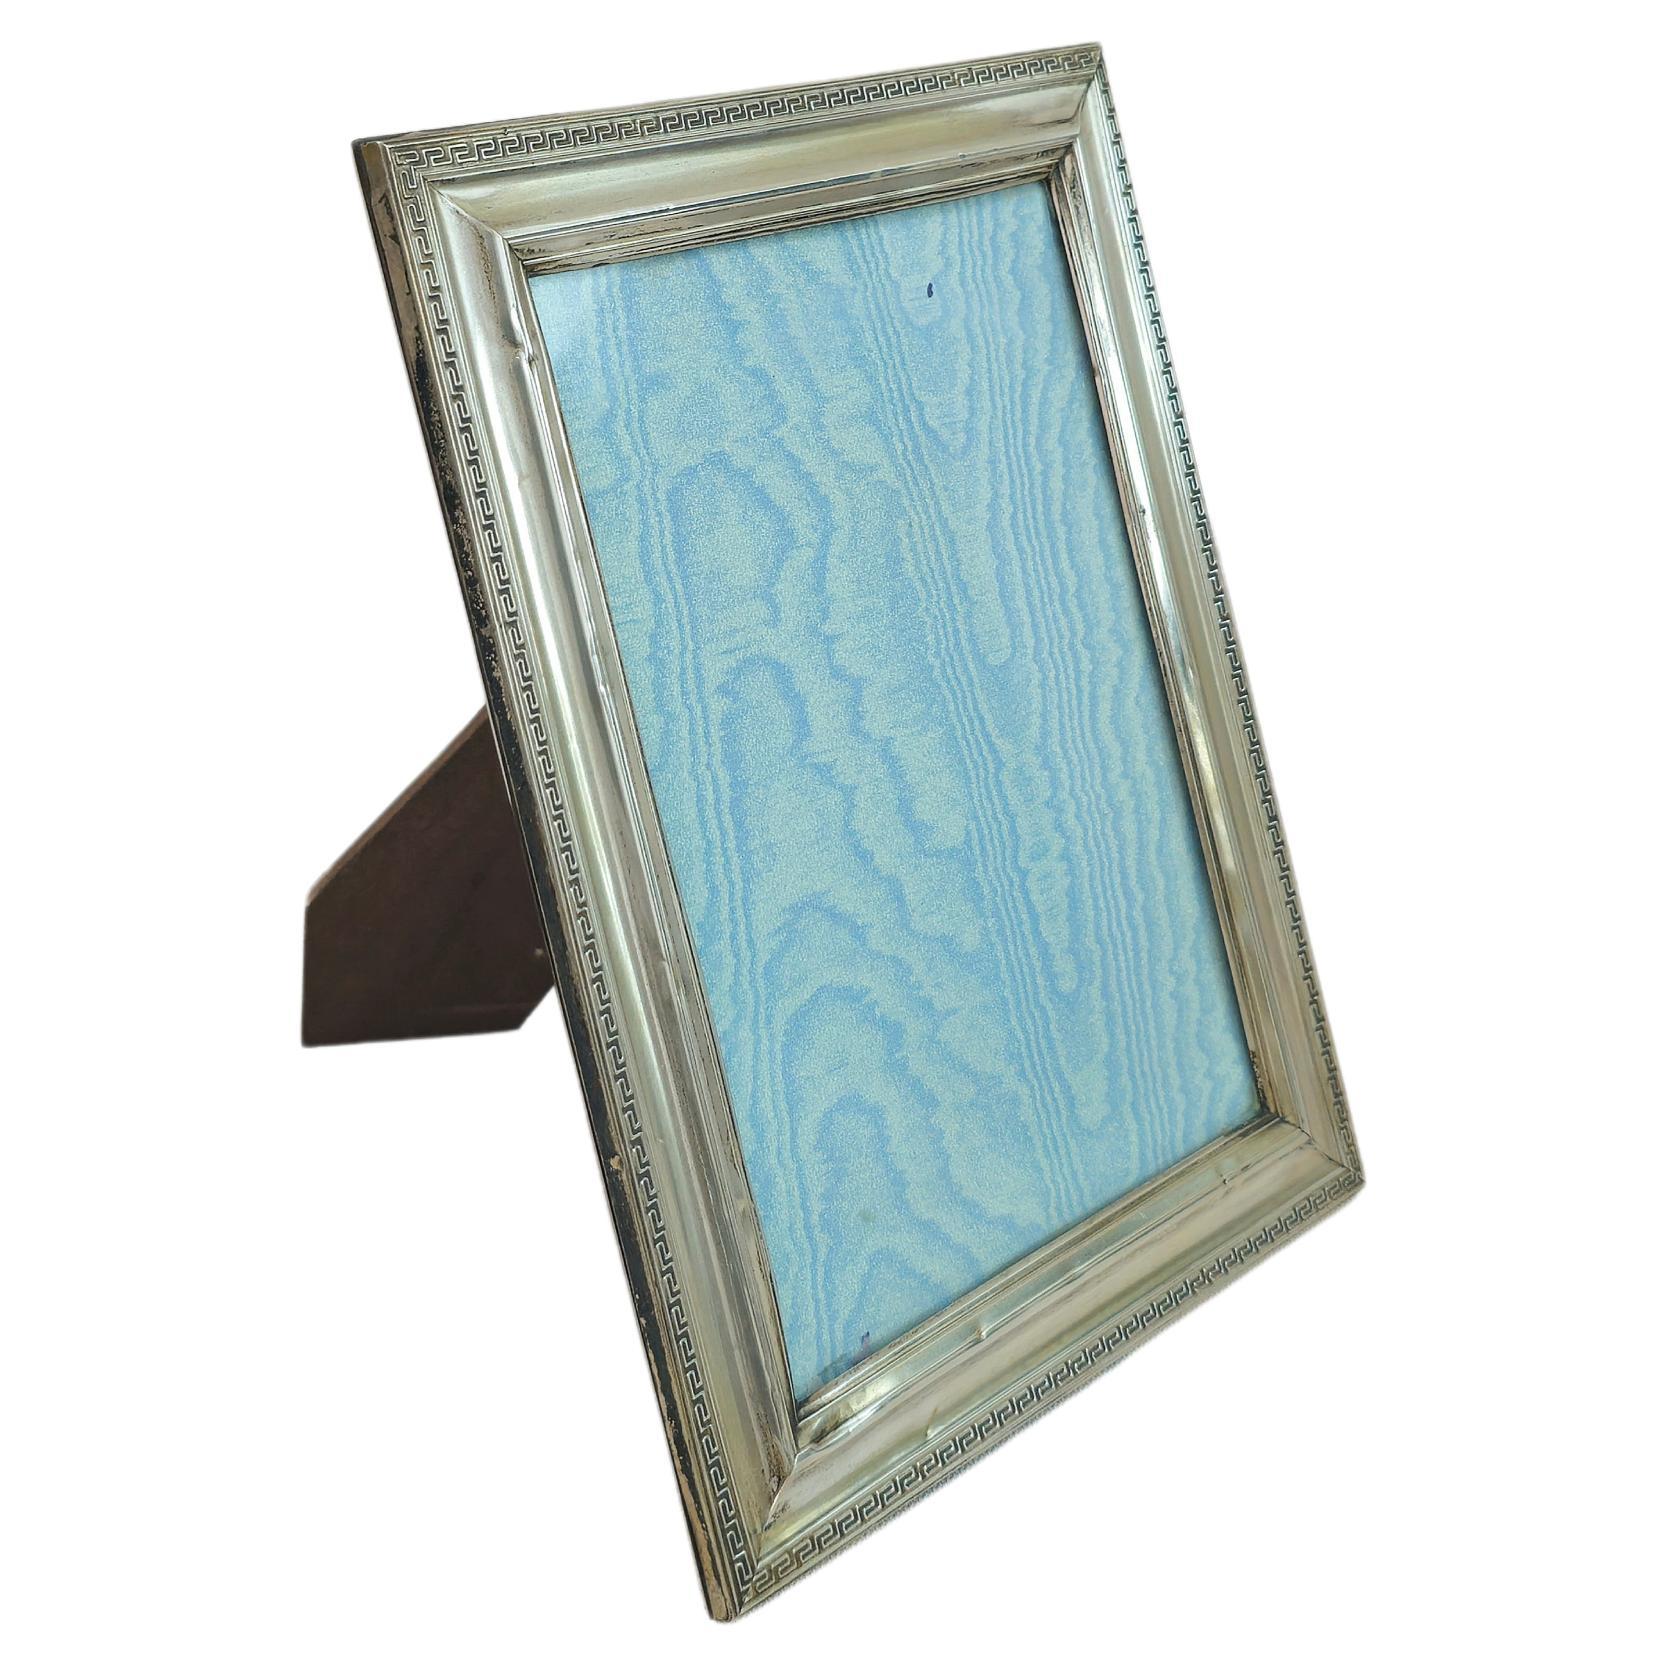 Decorative Object Picture Frame Silver 800 Wood Midcentury Italian Design 1950s For Sale